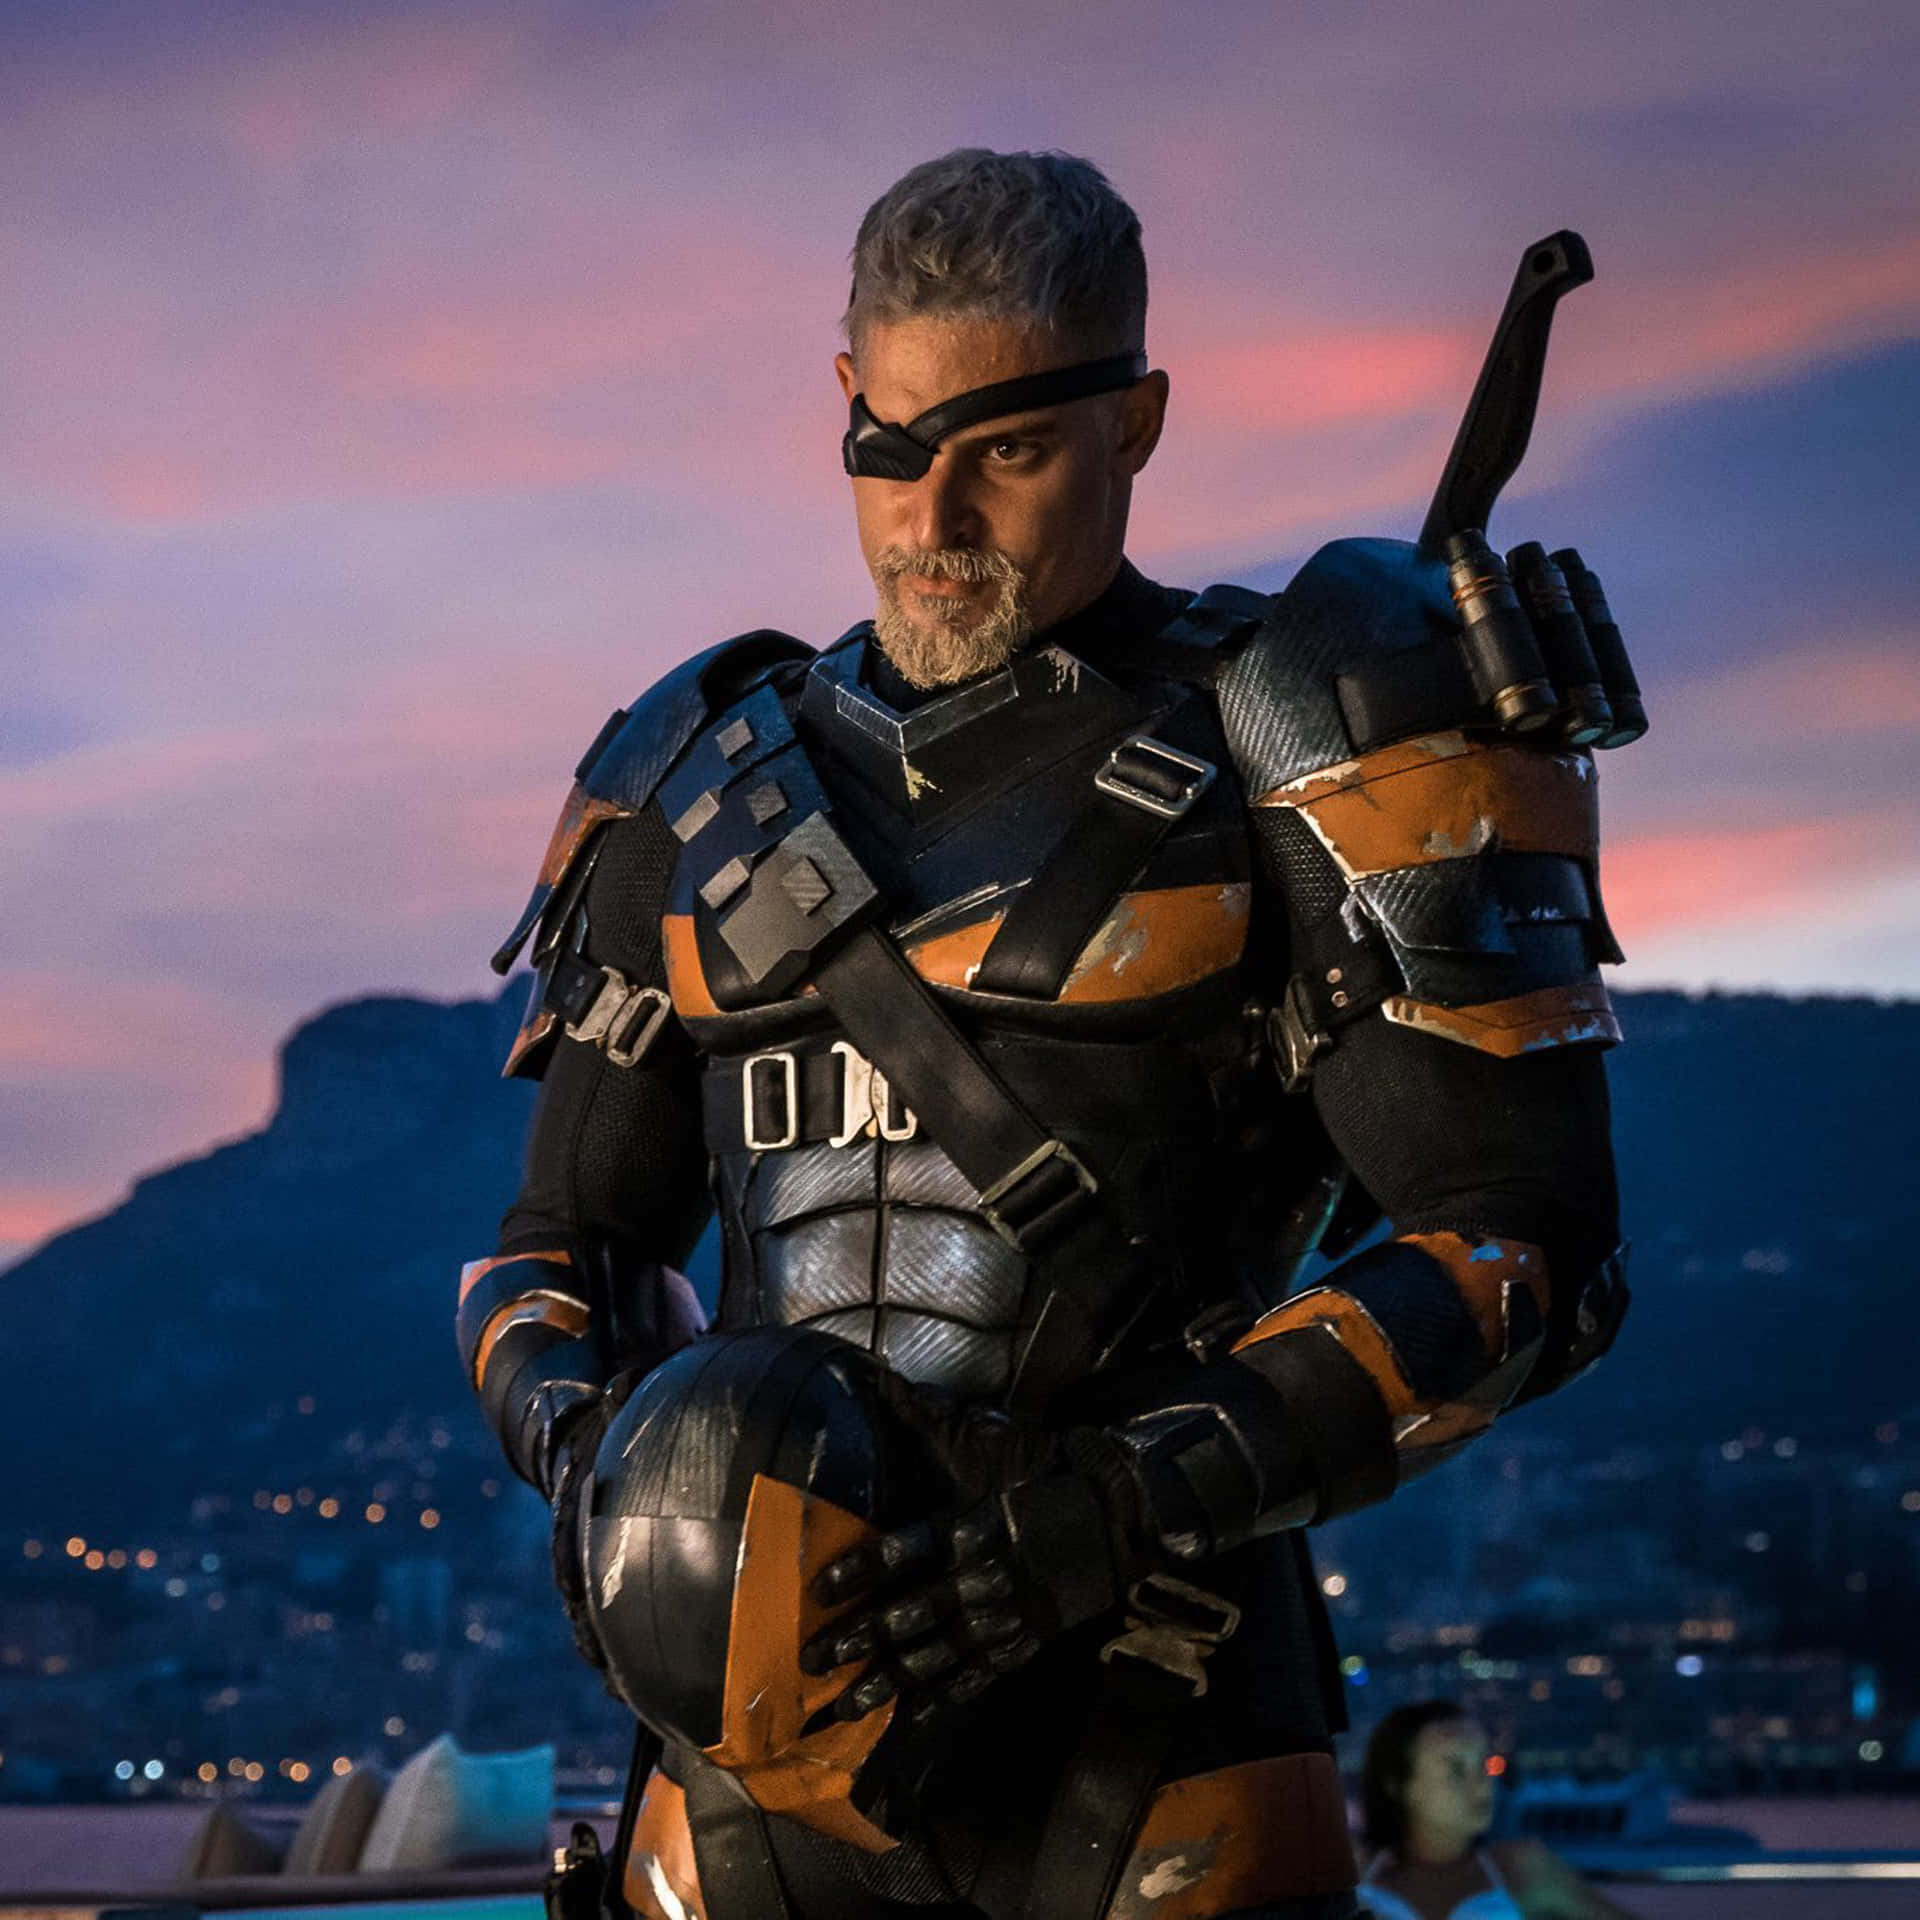 Deathstroke, the Ultimate Assassin